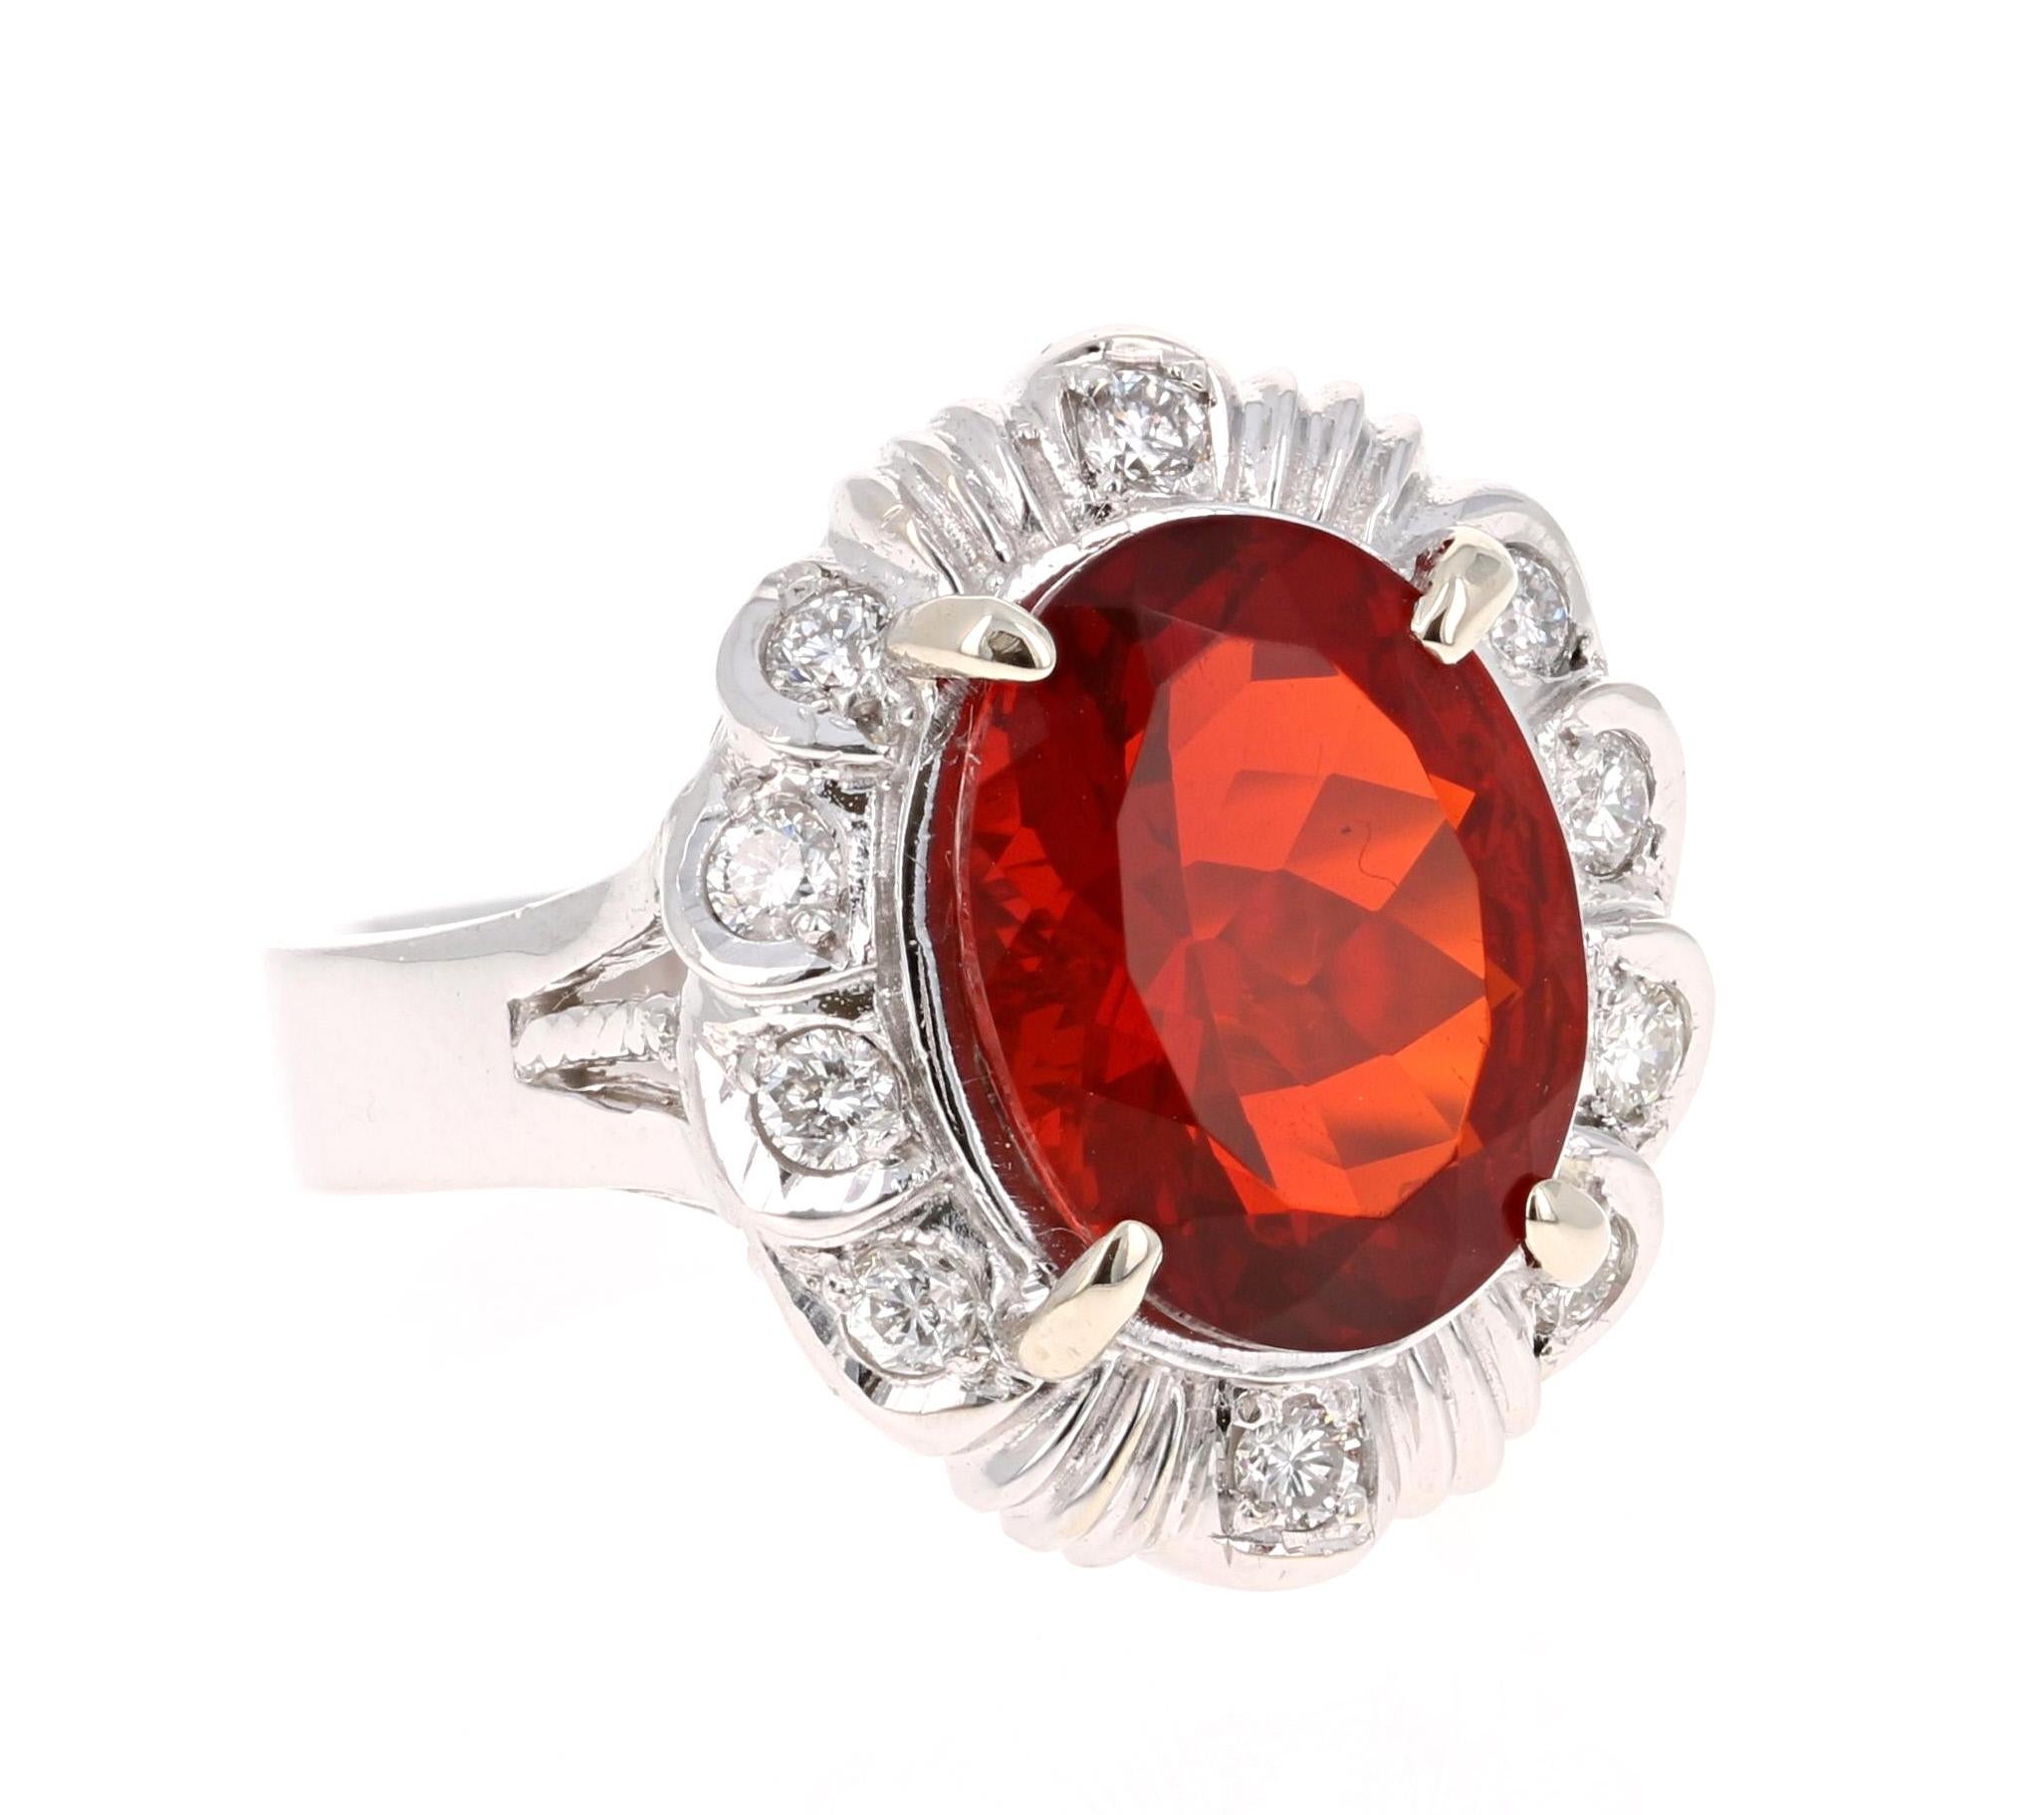 This gorgeous cocktail ring has a scintillating Oval Cut Fire Opal that weighs 3.42 carats and 10 Round Cut Diamonds that weigh 0.37 carats. (Clarity: SI2, Color: F)
The total carat weight of the ring is 3.79 carats.   
Crafted in 14K White